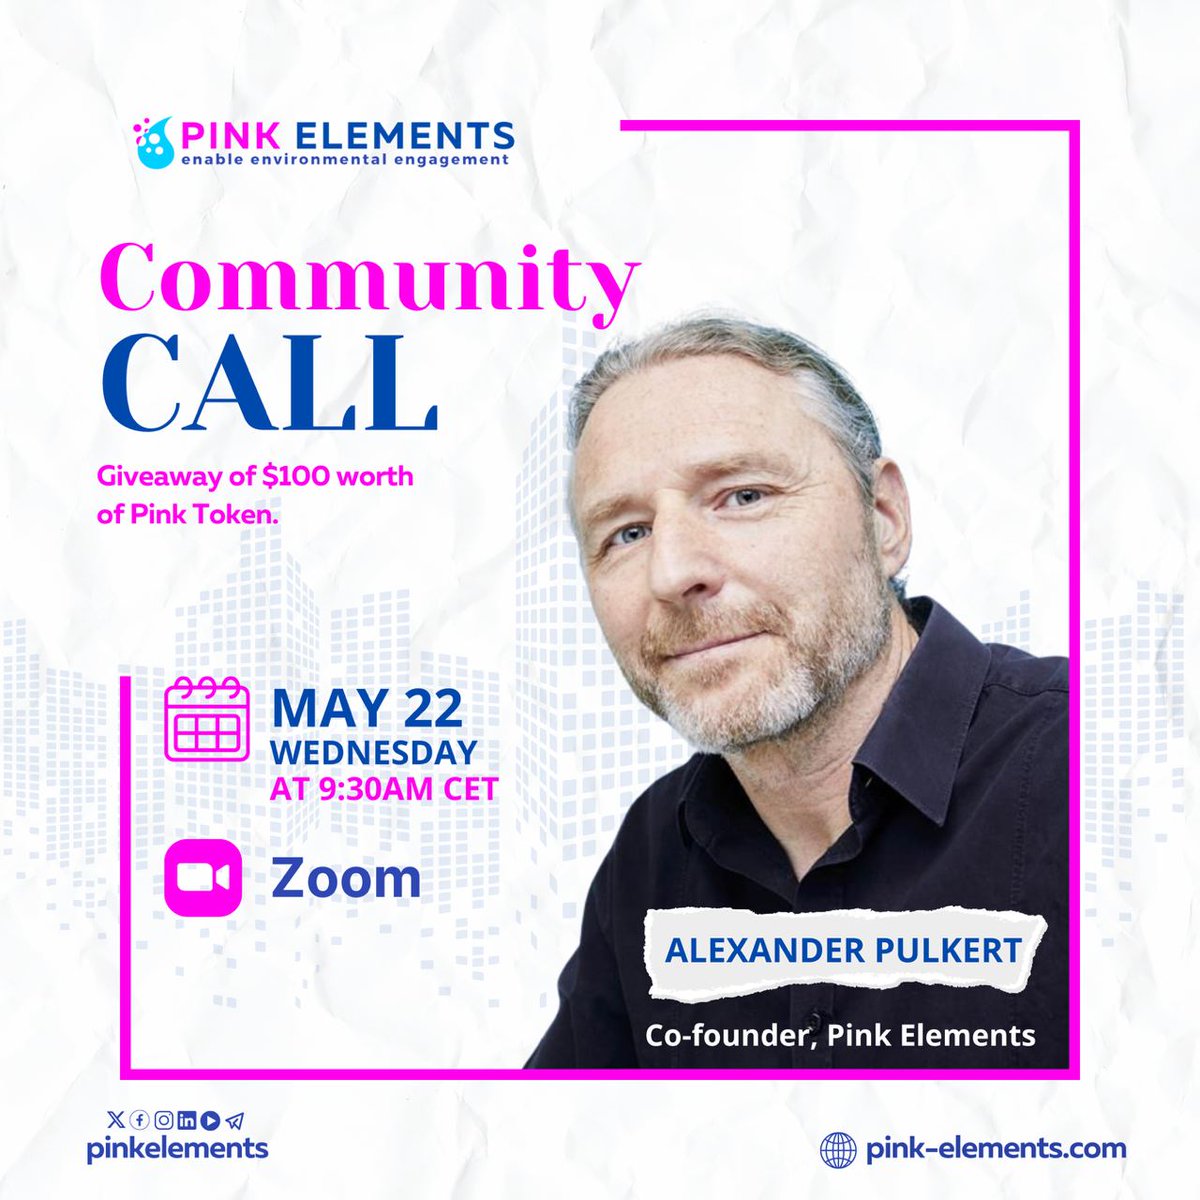 🌟🚀 Attention, Pink Pioneers! 🚀🌟

The moment you've been waiting for is almost here!
Get ready to dive into the heart of Pink Elements' universe with our Weekly Community Call!

📅May 22nd
🕤9:30 AM CET ⏰
💻Pink Elements Zoom 💬
Join us online and be part of the conversation!